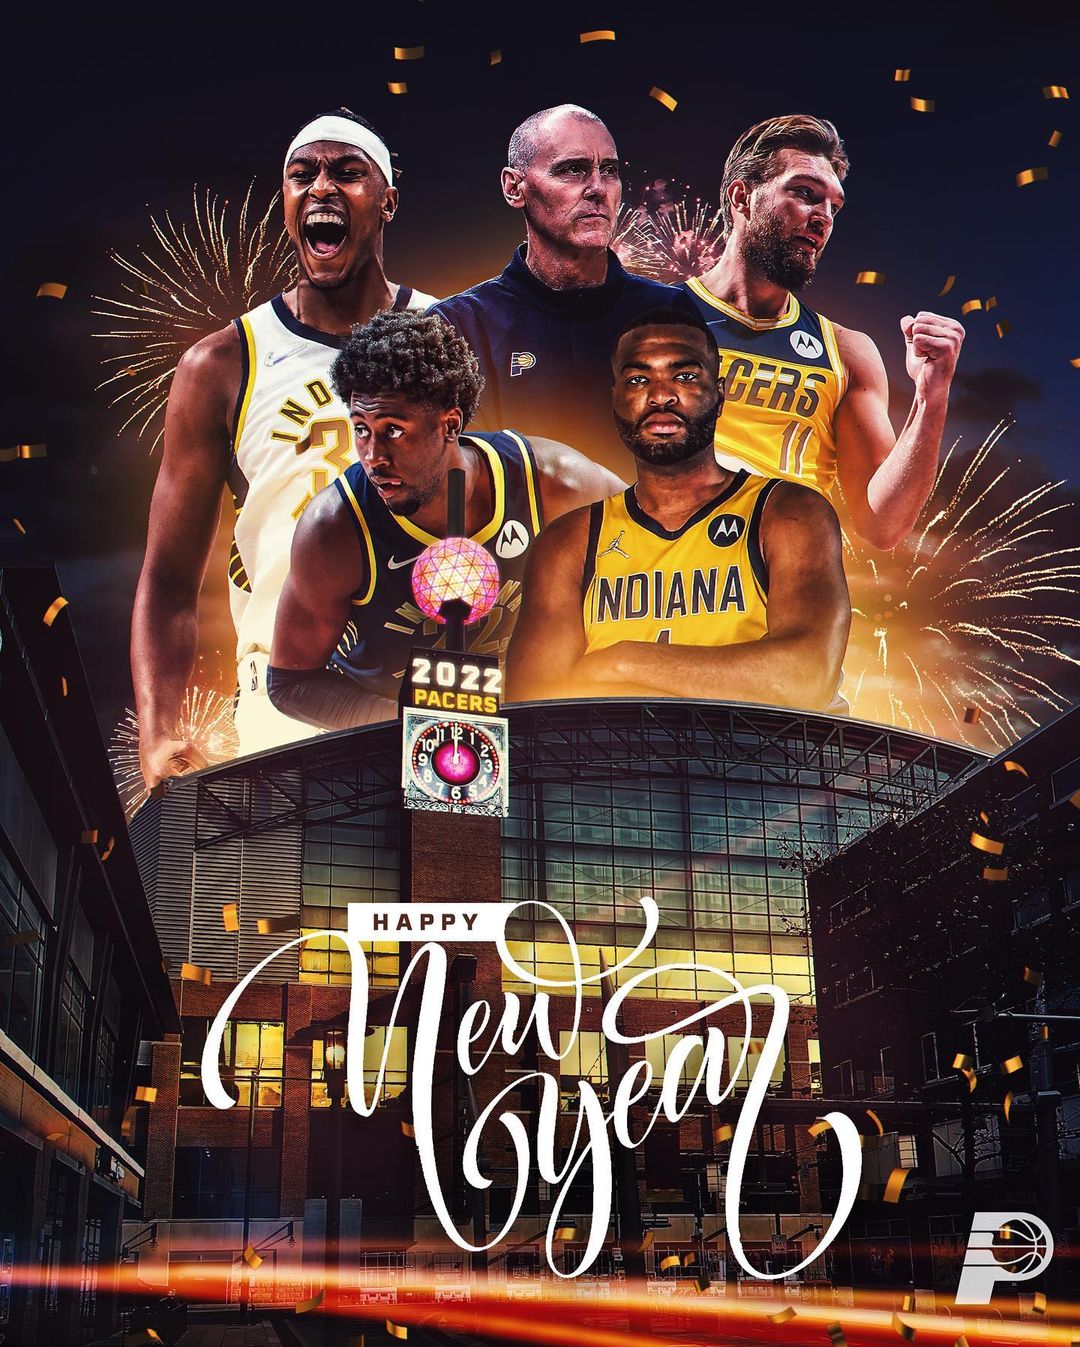 happy New Year, Pacers fans  we appreciate your support & hope you have a safe,...